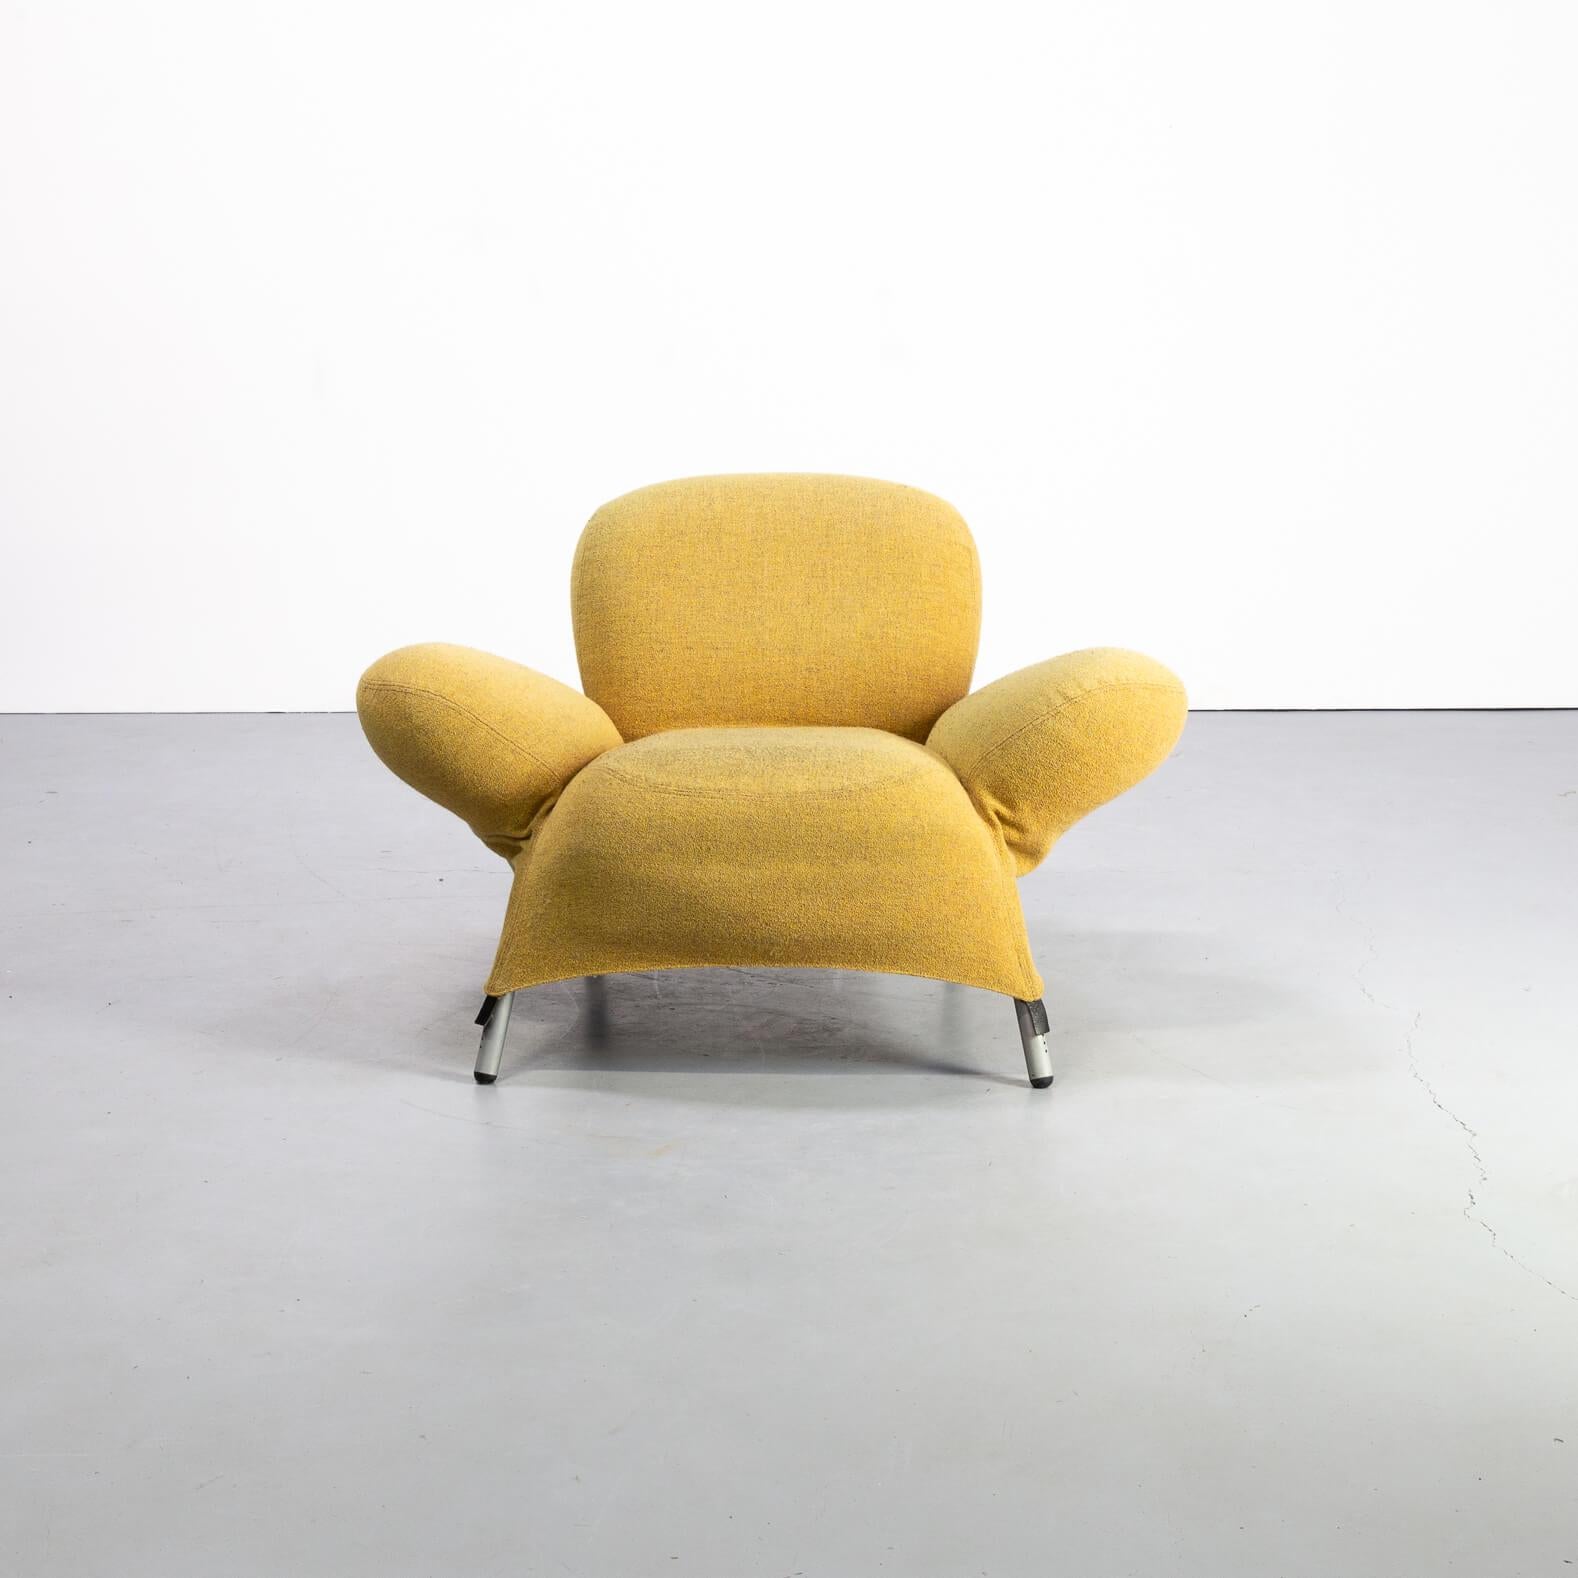 The ‘Bobo’ fauteuil is a fine example of this way of design by Gerard Van Den Berg. This uniquely shaped shell comes with a lot of possible sitting possibilities. Changing sitting positions in an armchair is kind of difficult because the armrest is